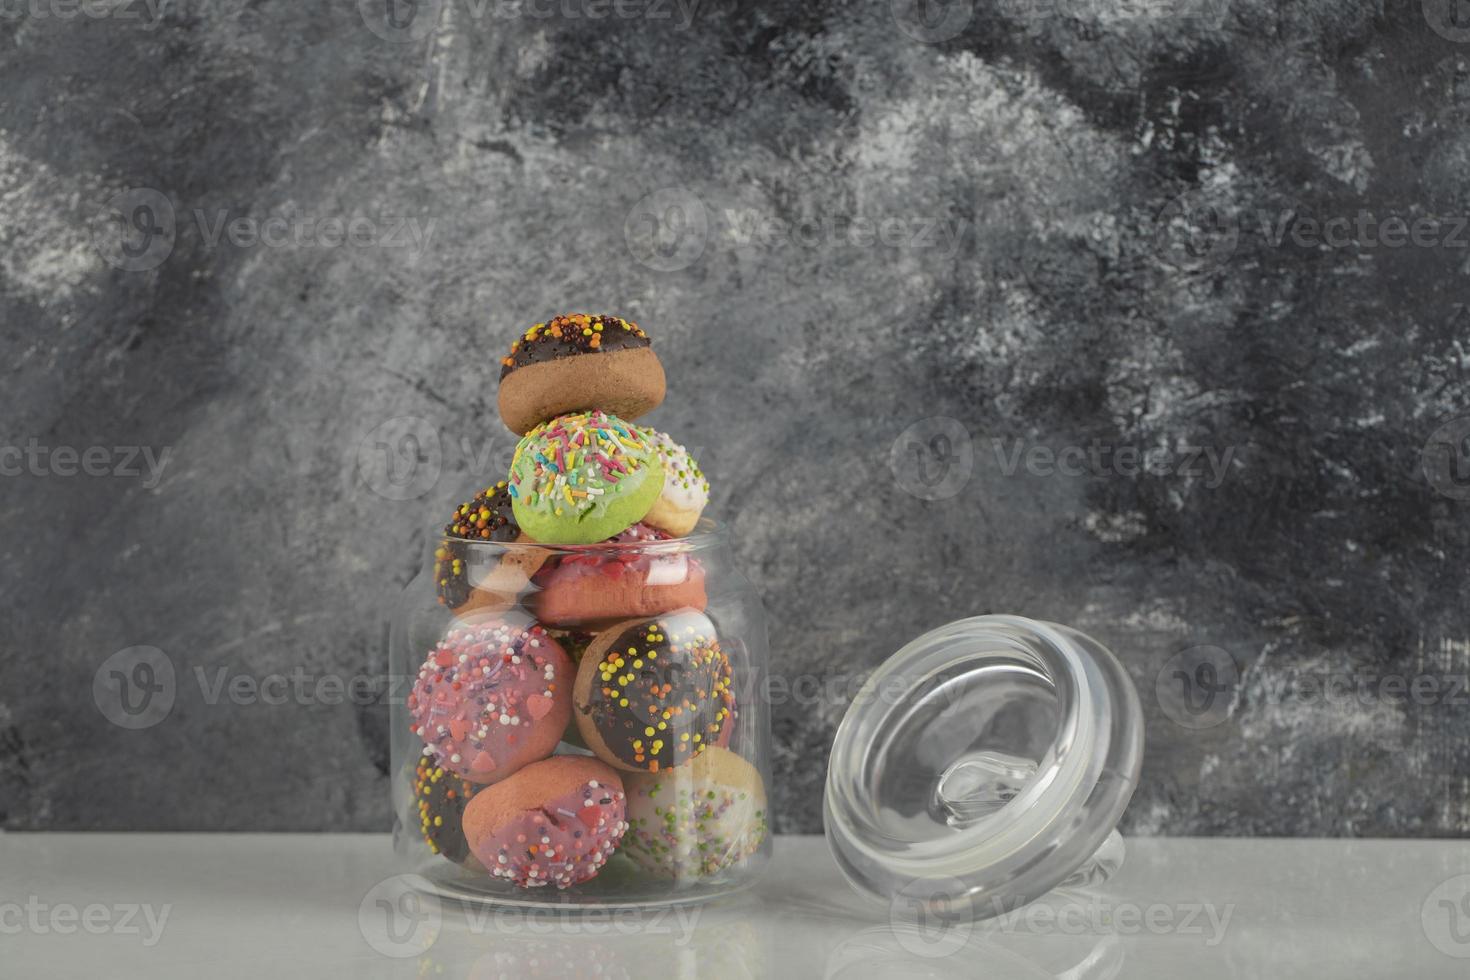 A glass jar full of small colorful doughnuts photo